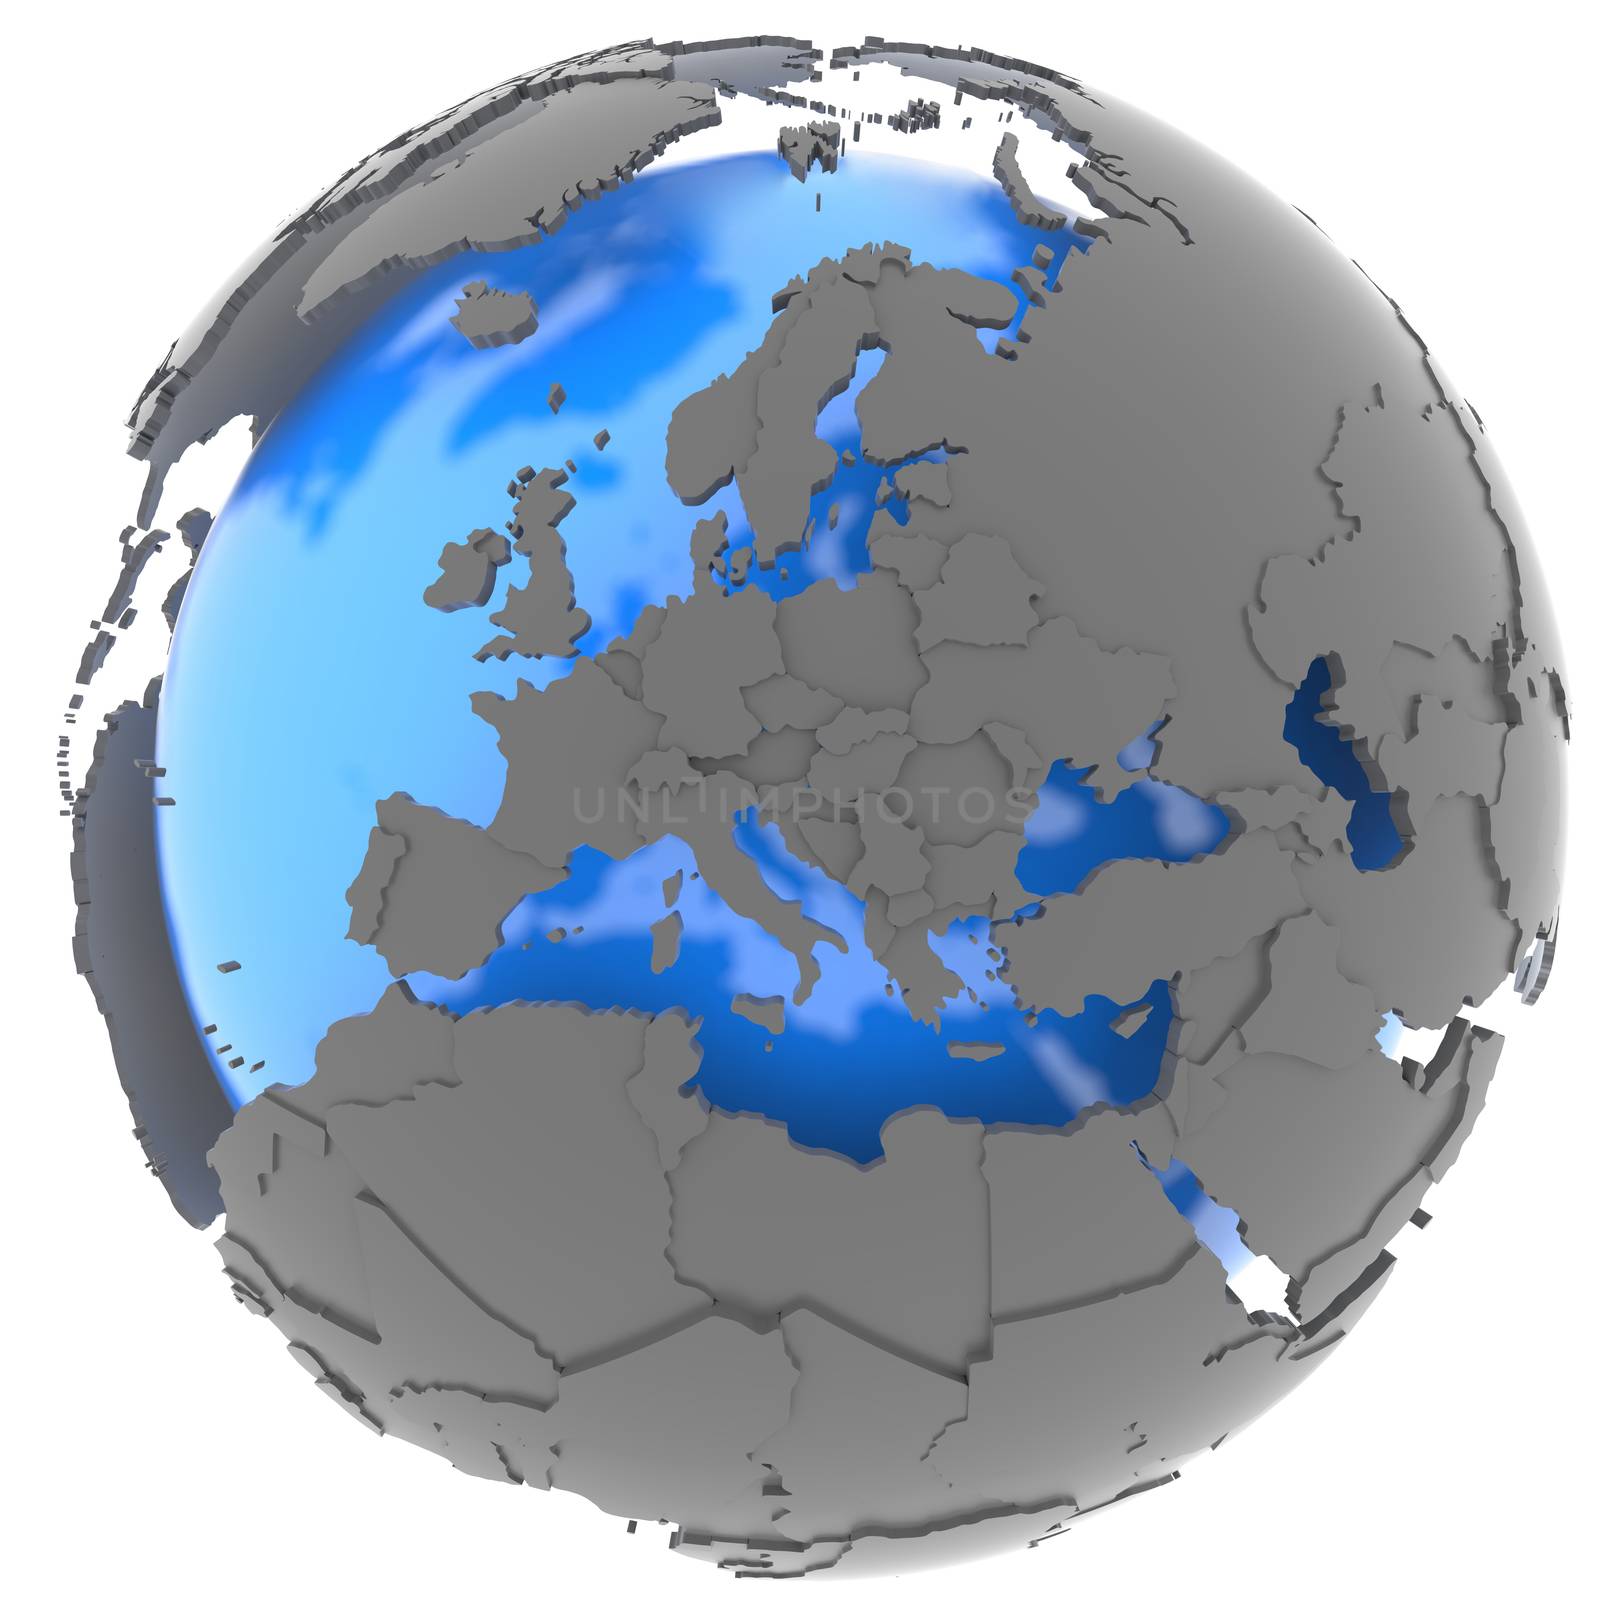 Europe on the globe by Harvepino